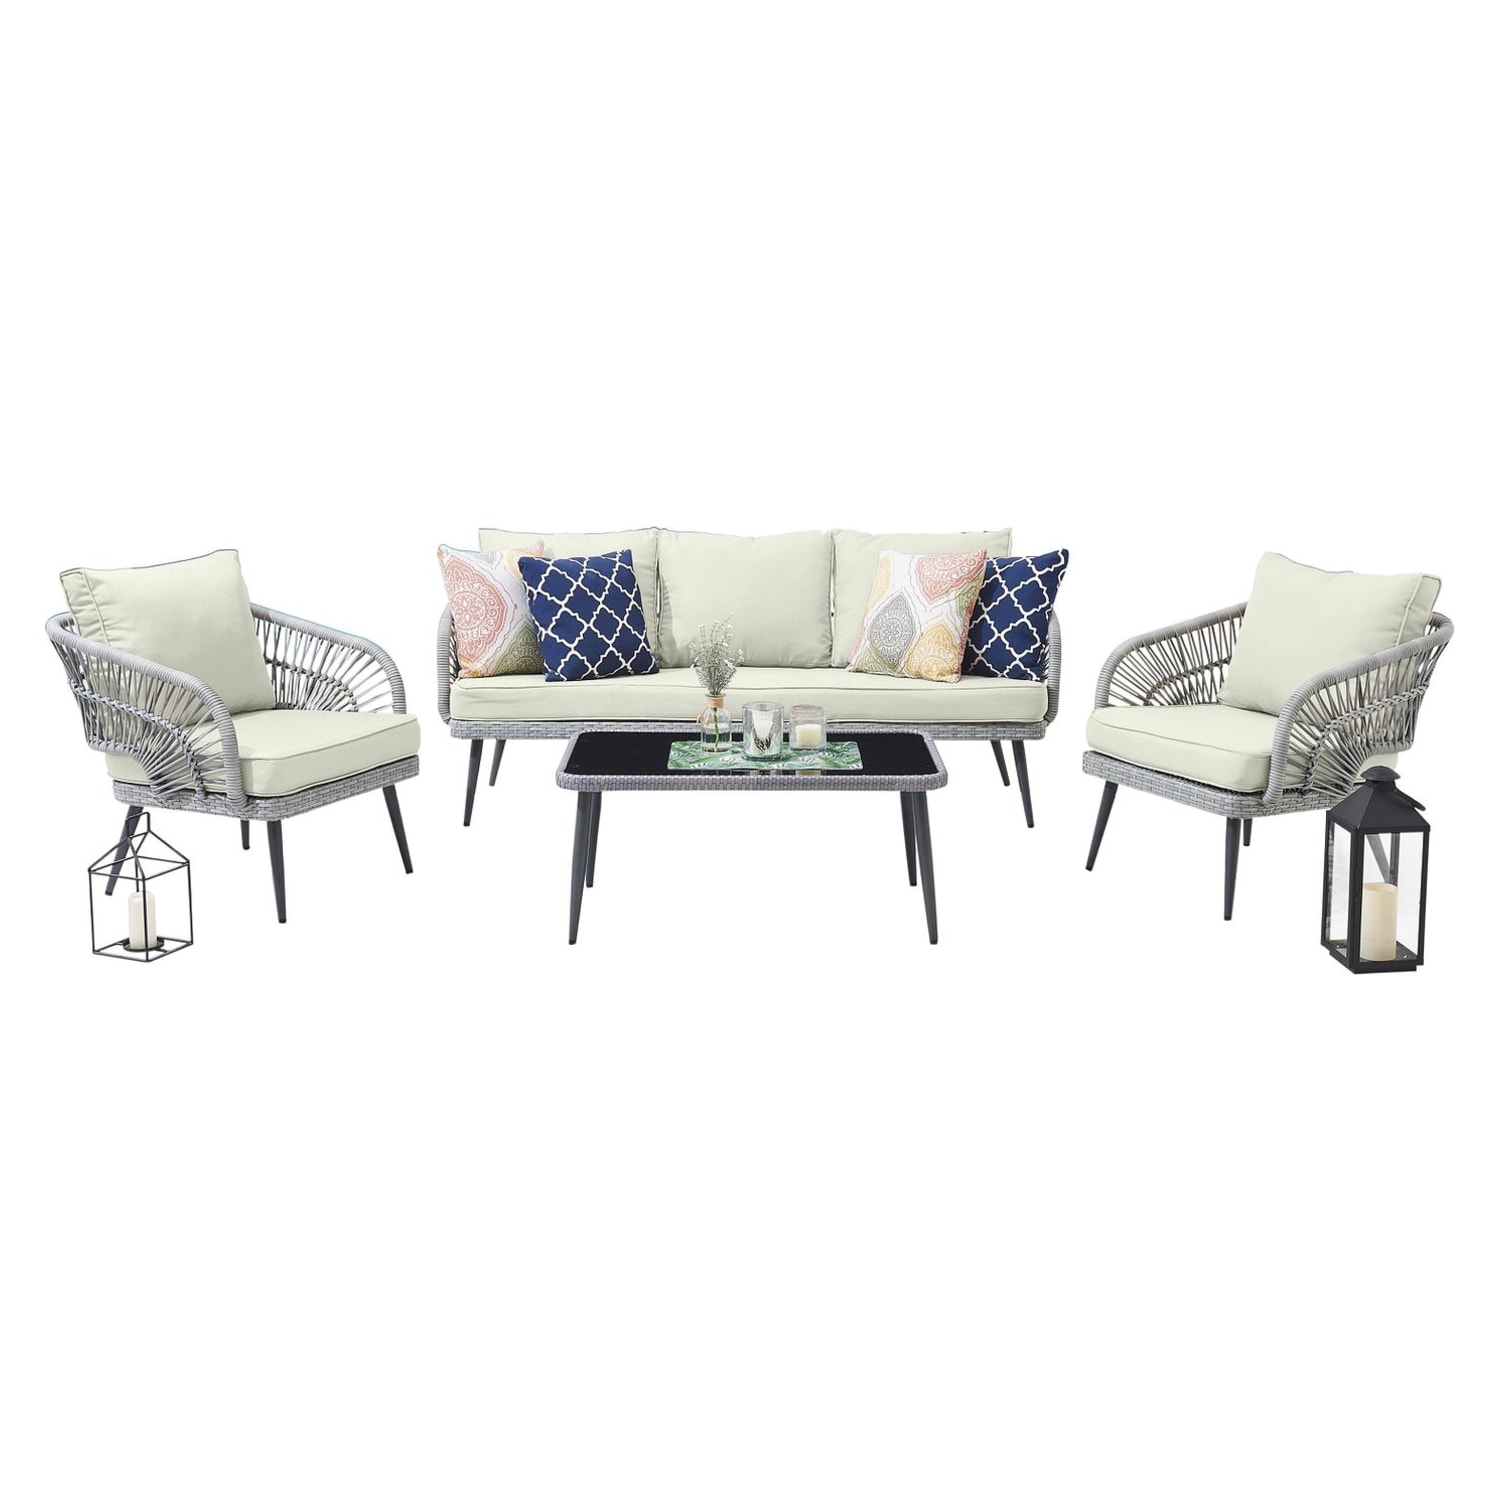 Riviera Rope Wicker 4-Piece 5 Seater Patio Conversation Set with Cushions in Gray and Cream